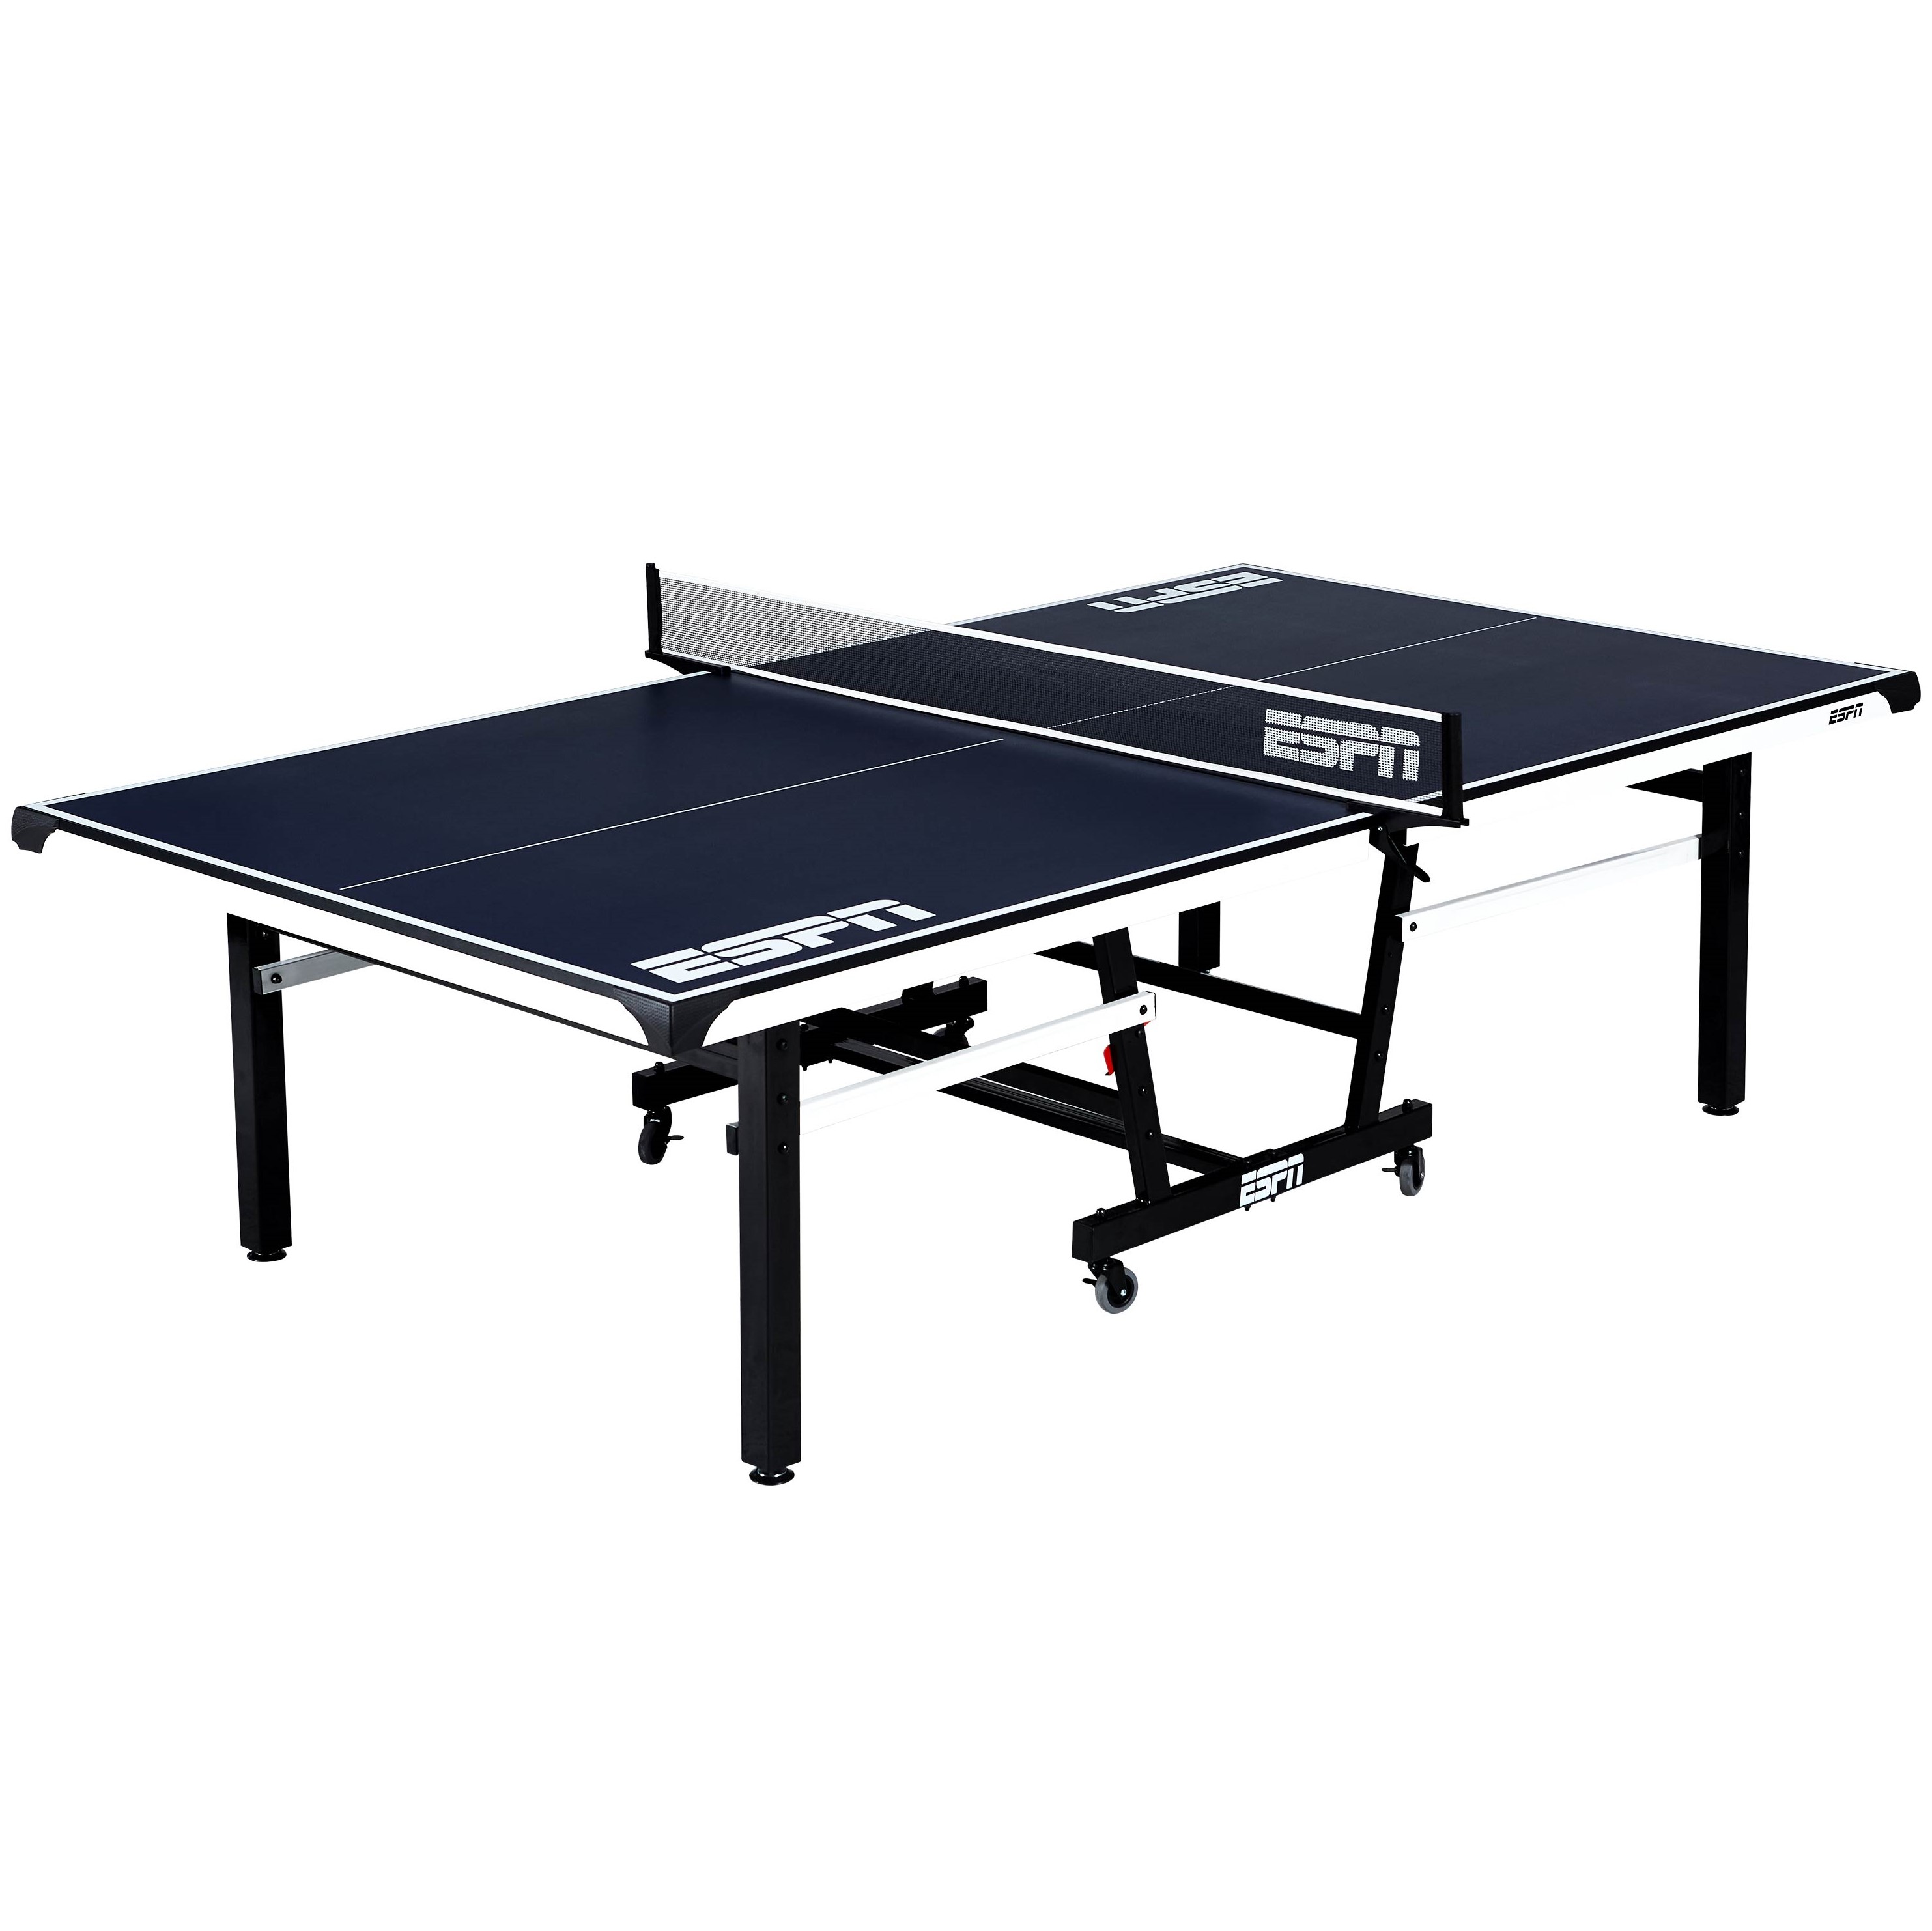 Table Tennis Ping Pong Clamp Net & Post Set RRP $29 Free Delivery 